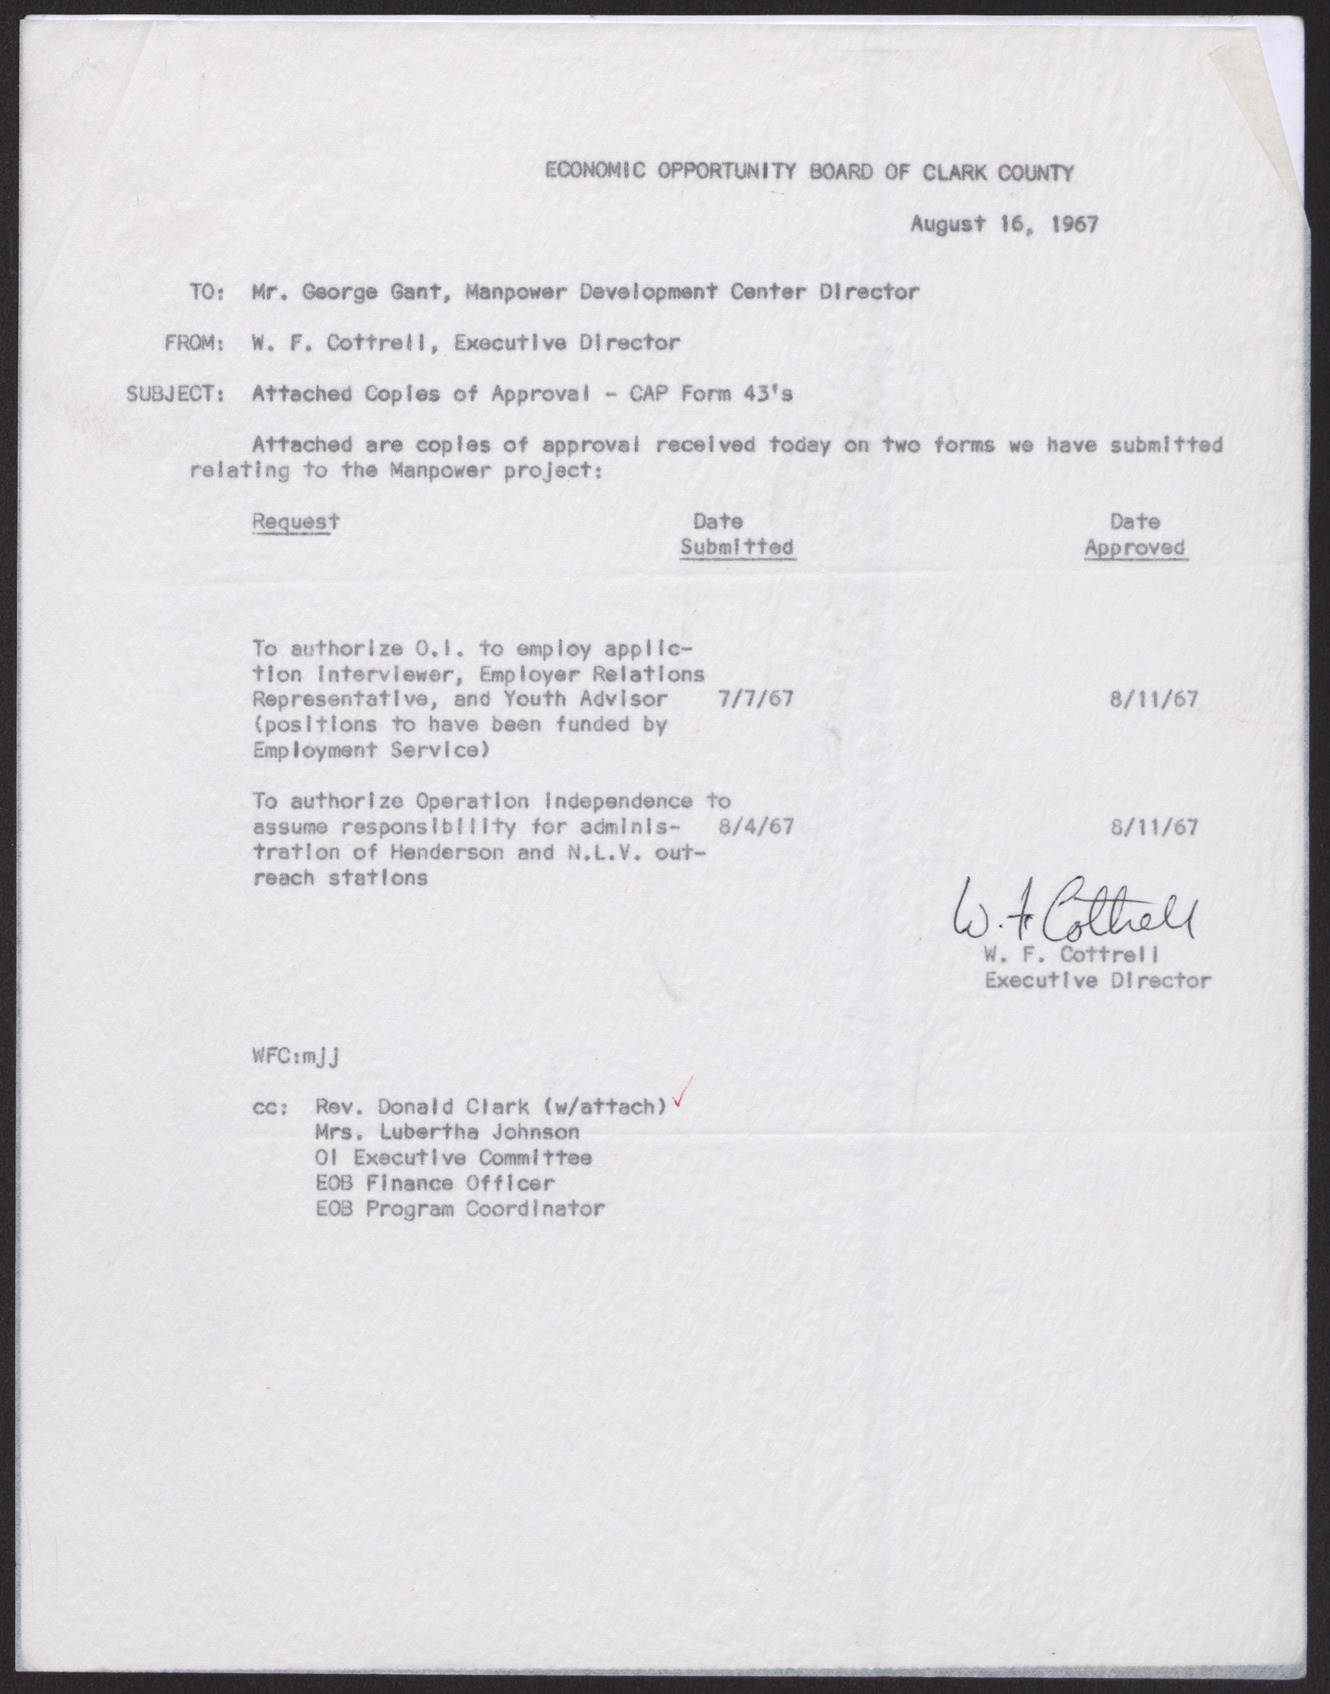 Letter to Mr. George Gant from W. F. Cottrell with attached copies of approval papers relating to the Manpower project (4 pages), August 16, 1967